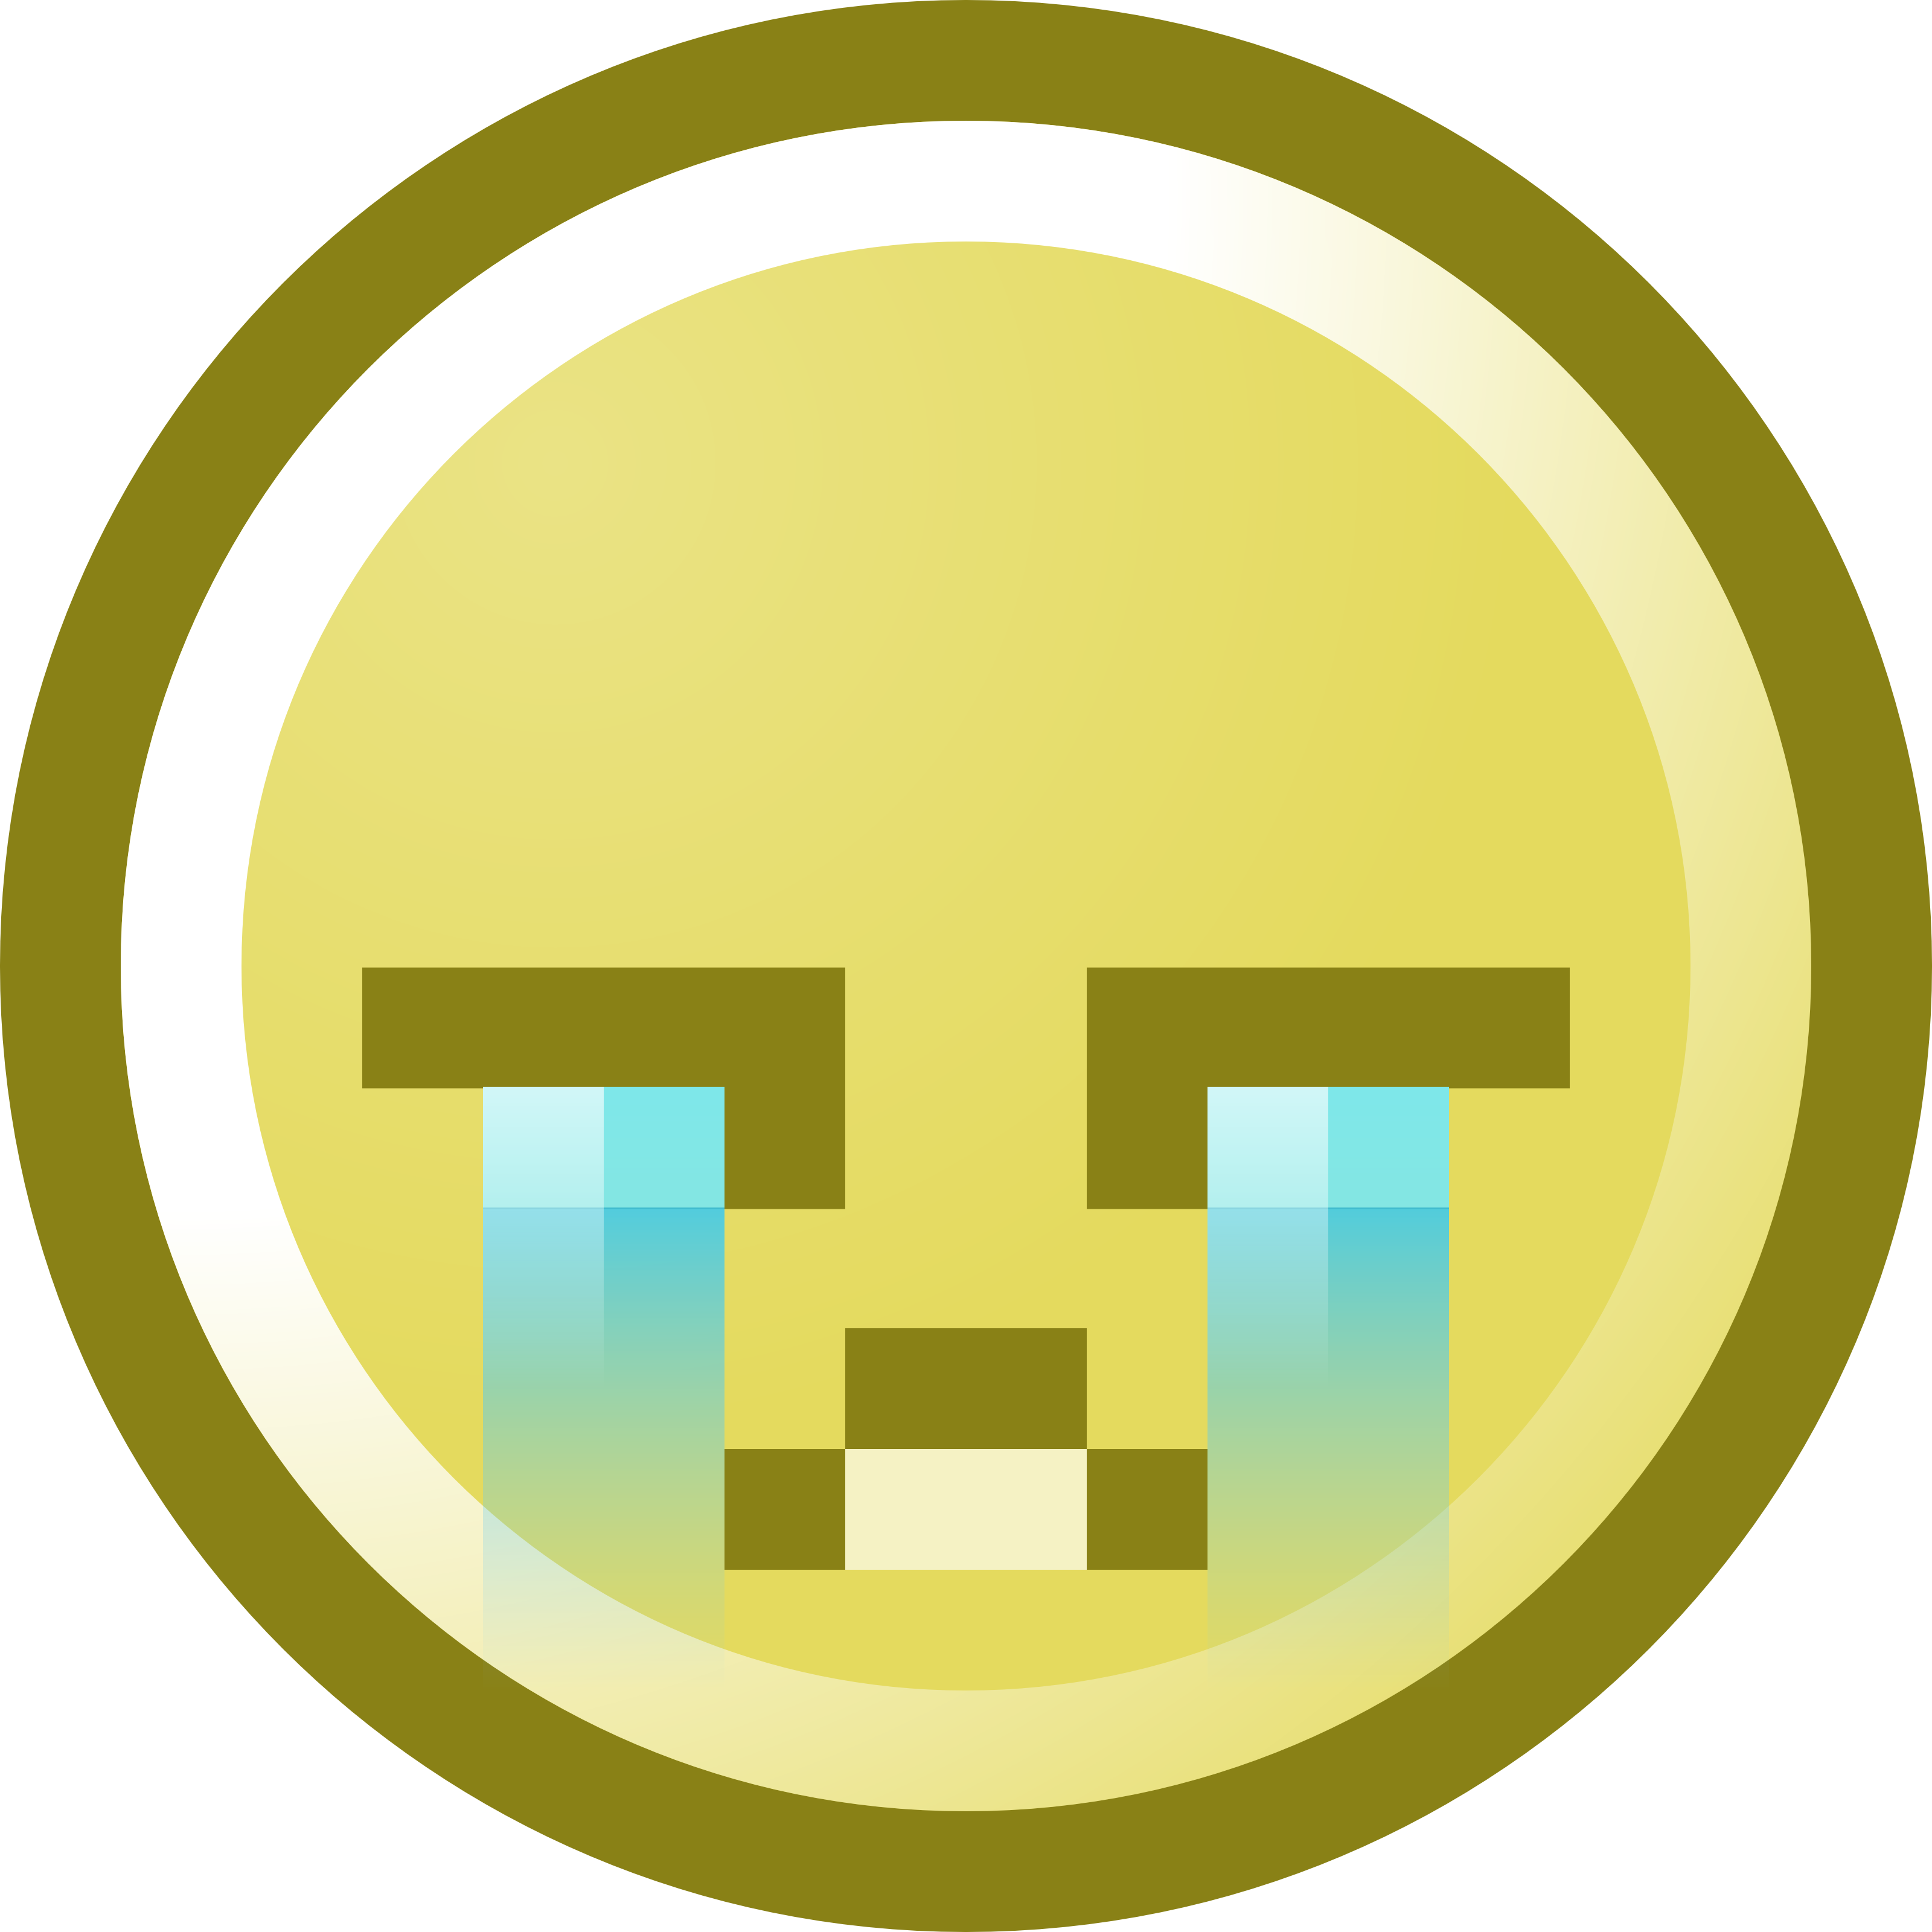 Crying Smiley Face Clip Art